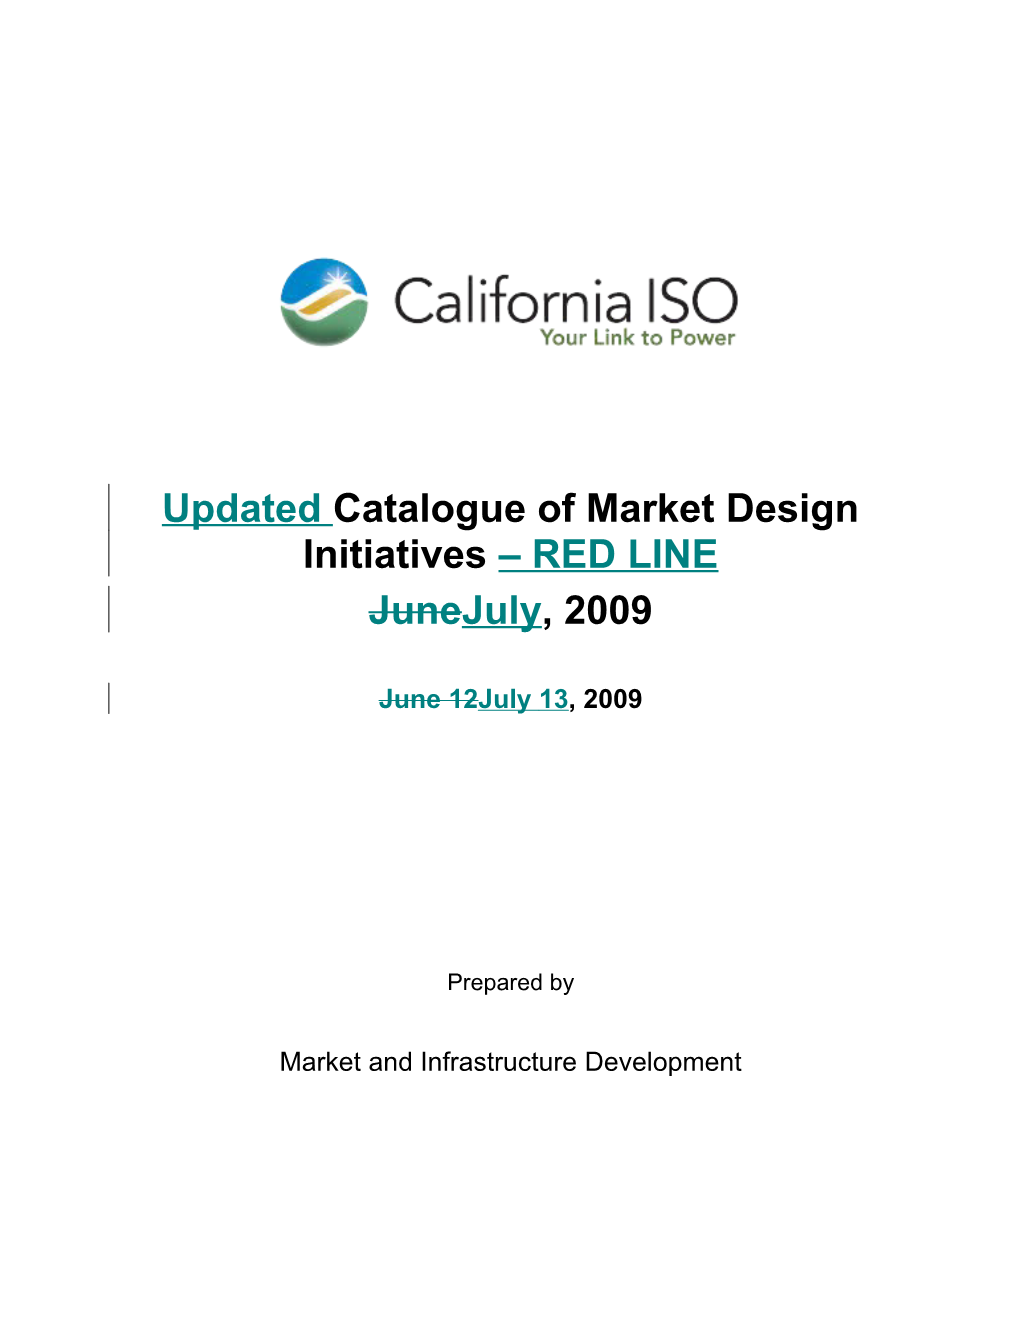 Updated Catalogue of Market Design Initiatives, July 2009 - Red Line Version